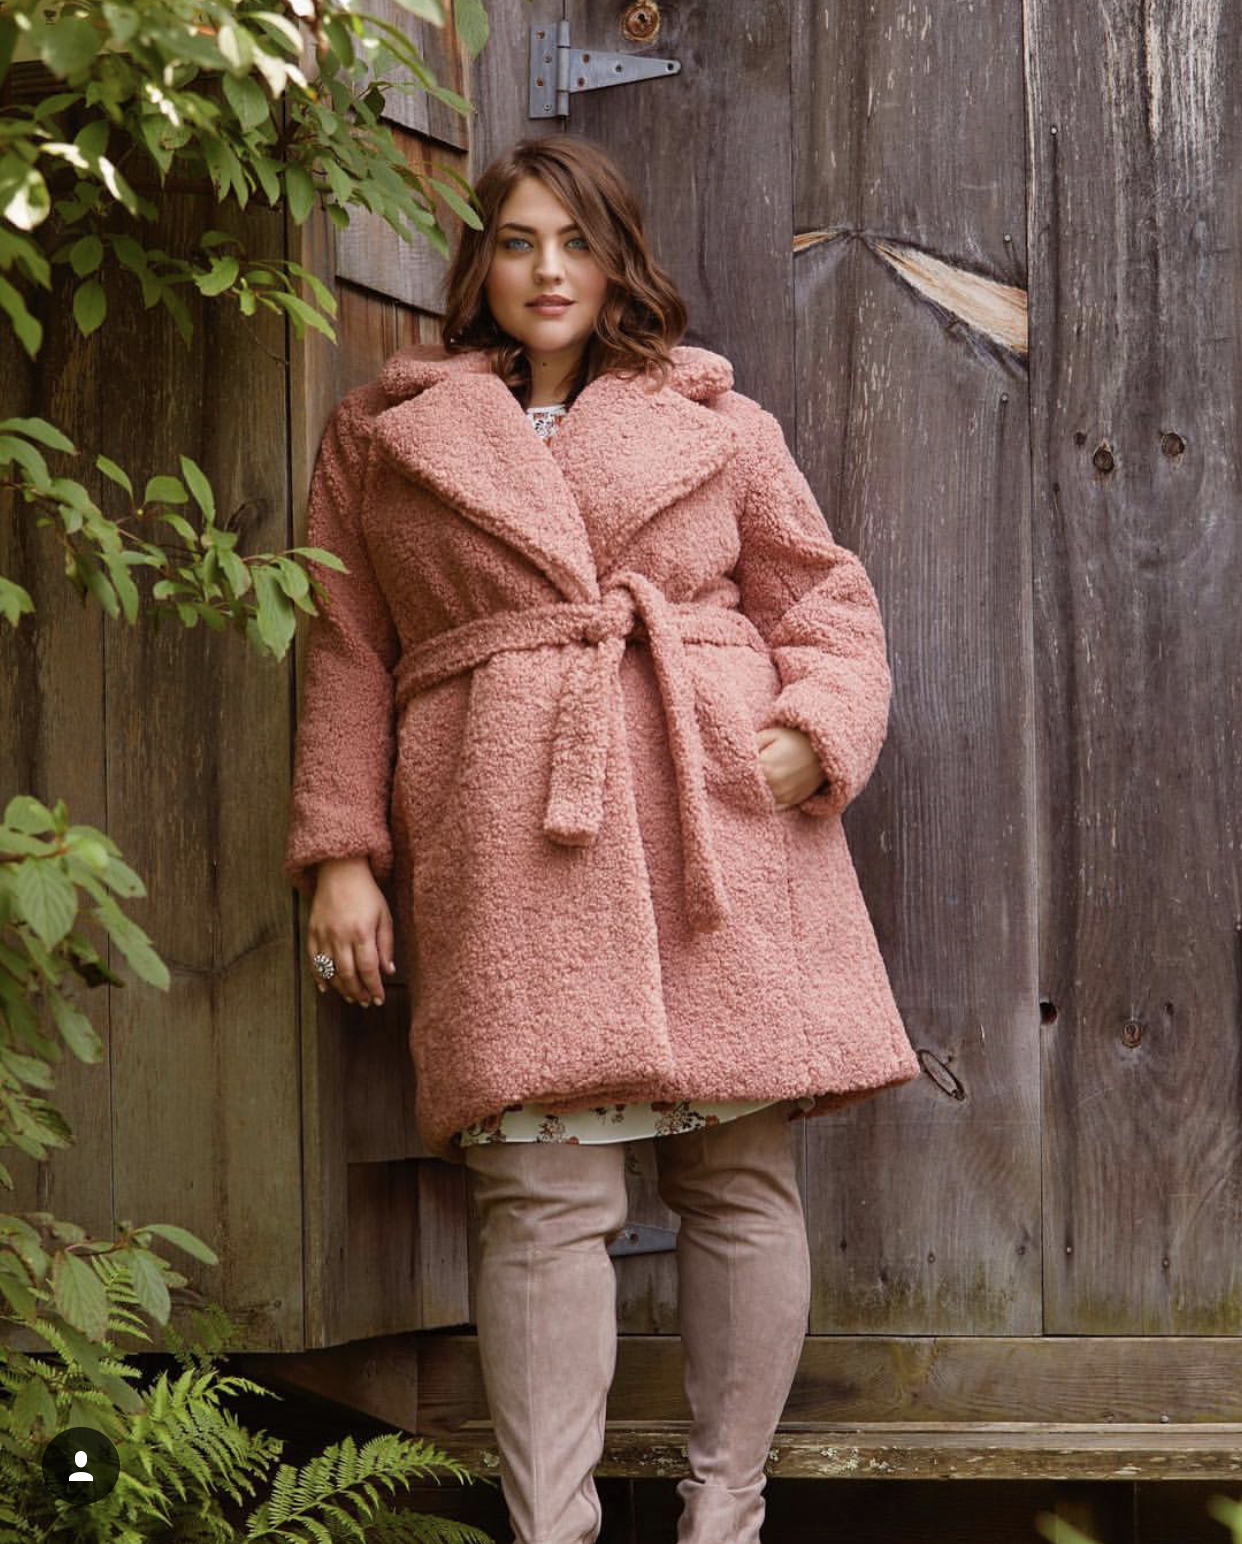 The Ultimate Shopping Guide For Plus Size Winter Coats